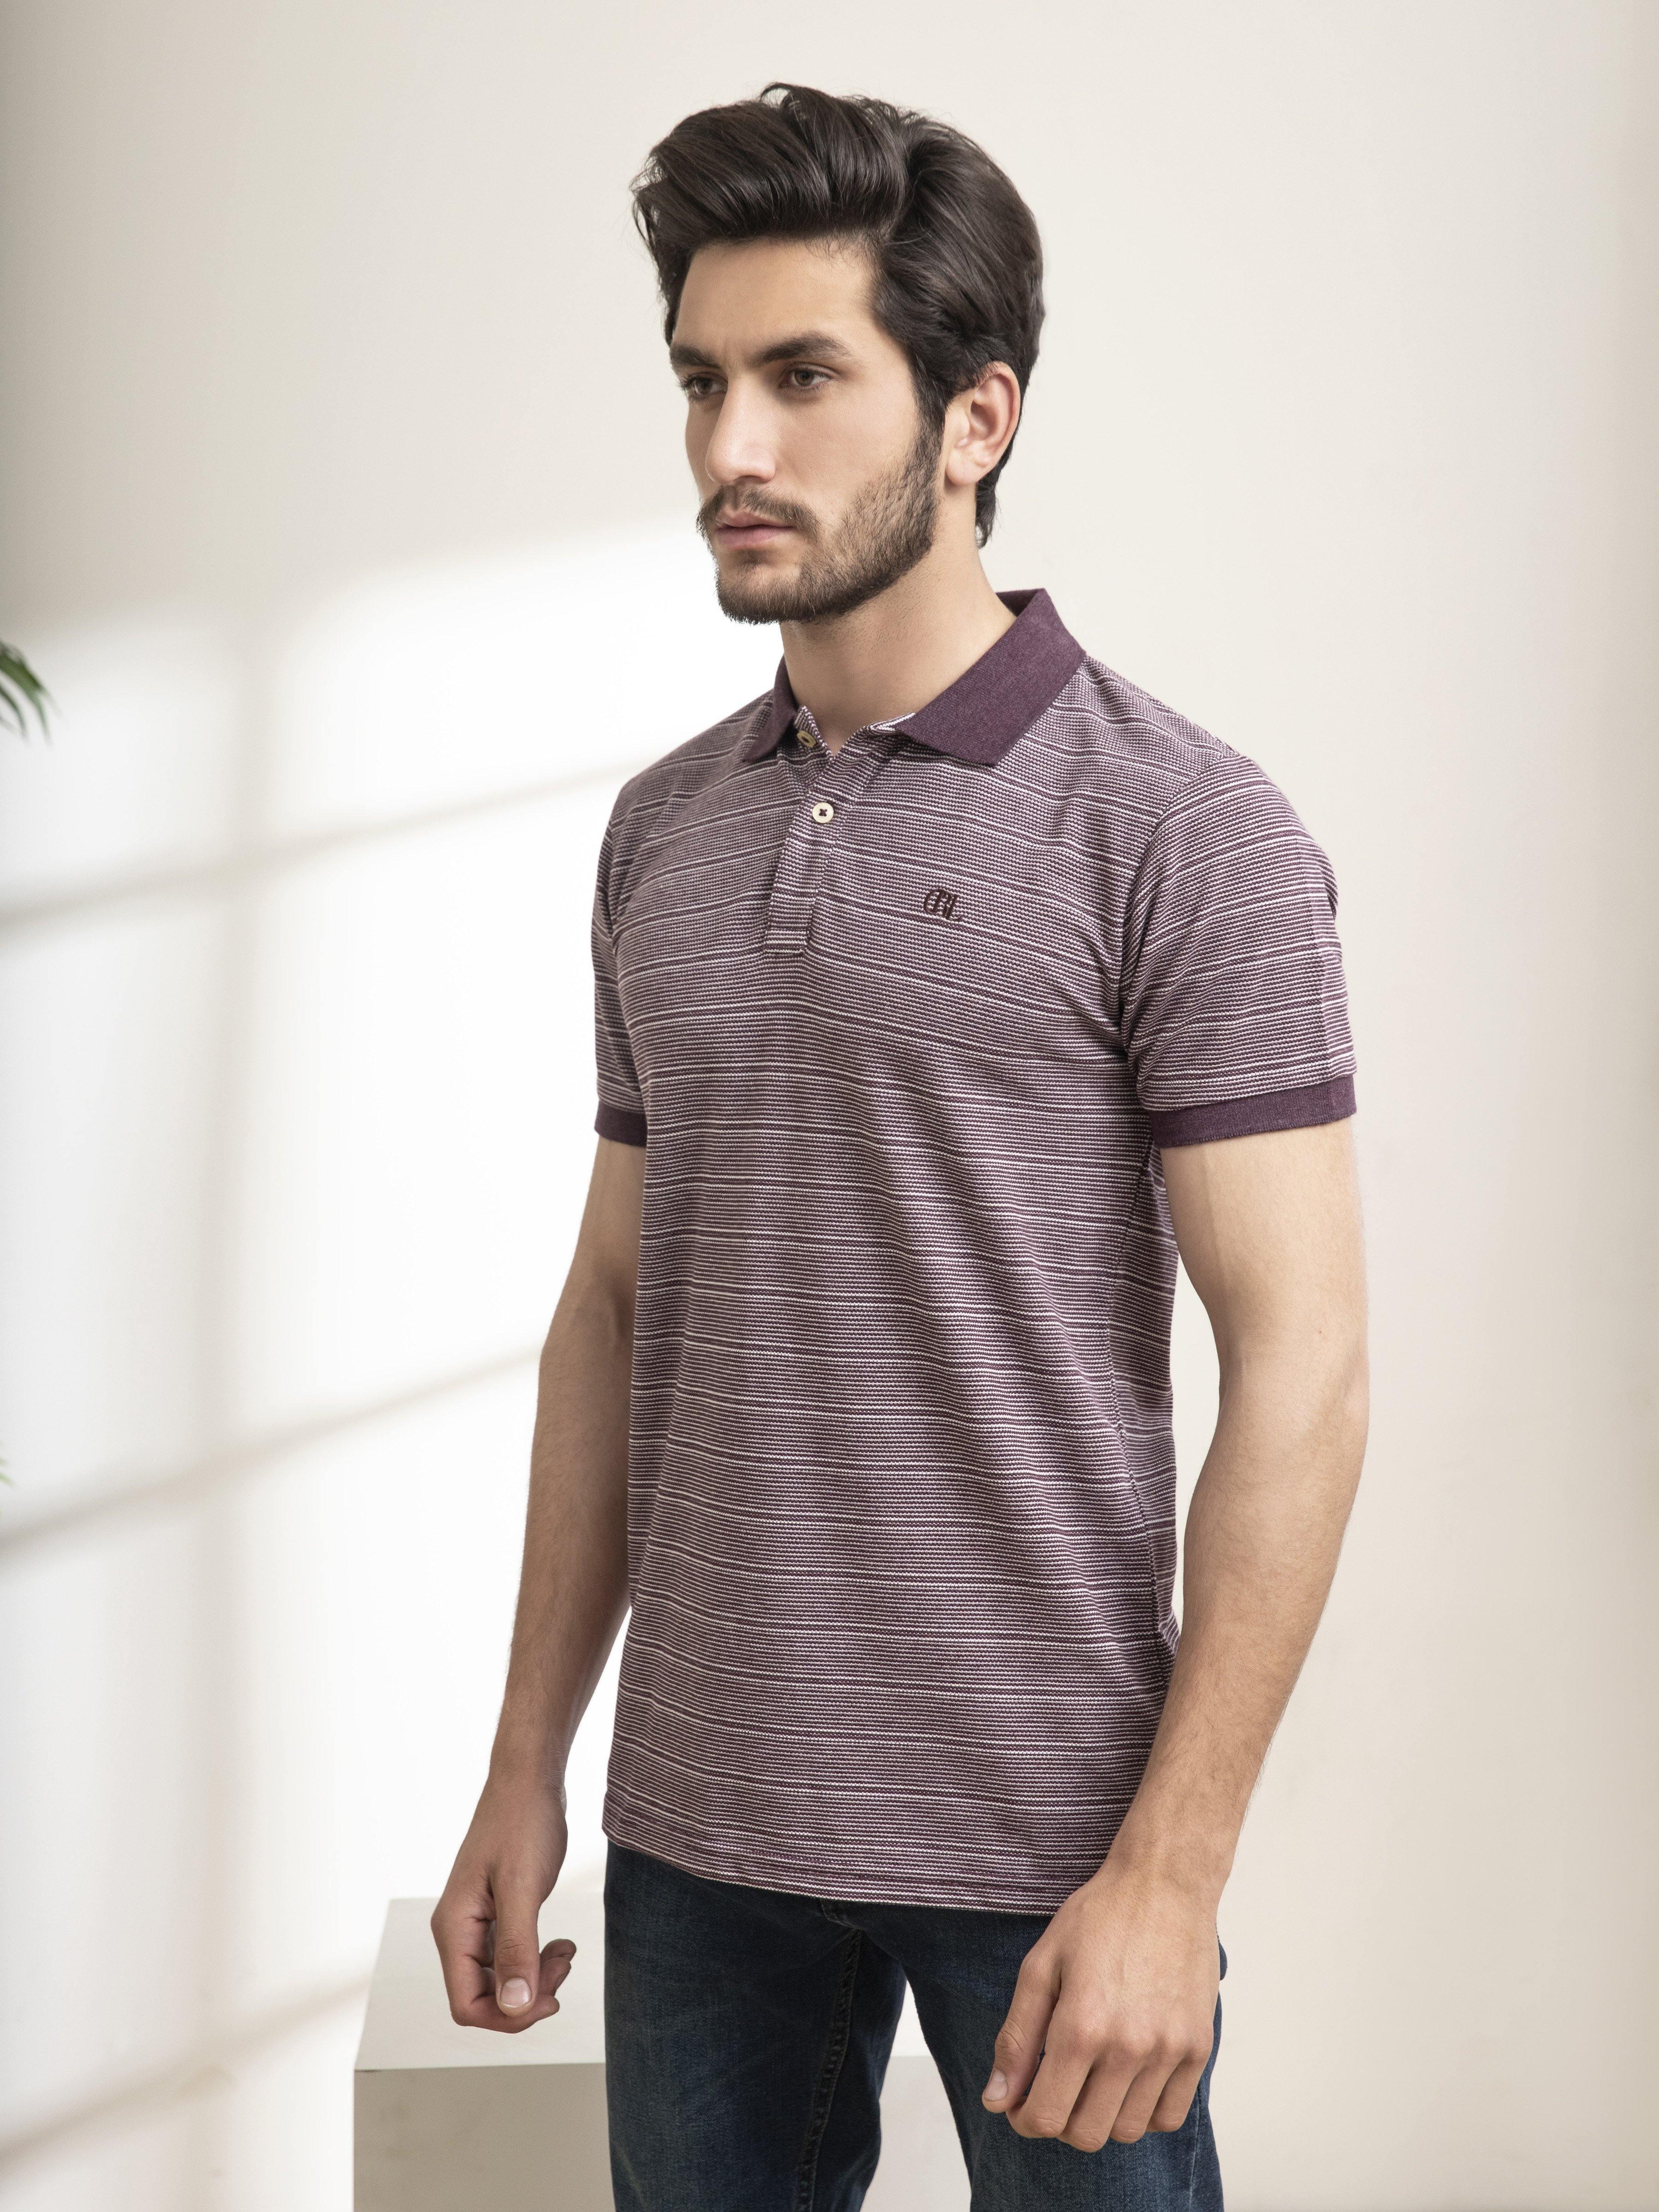 POLO SHIRT DOUBLE TONE MAROON WHITE at Charcoal Clothing